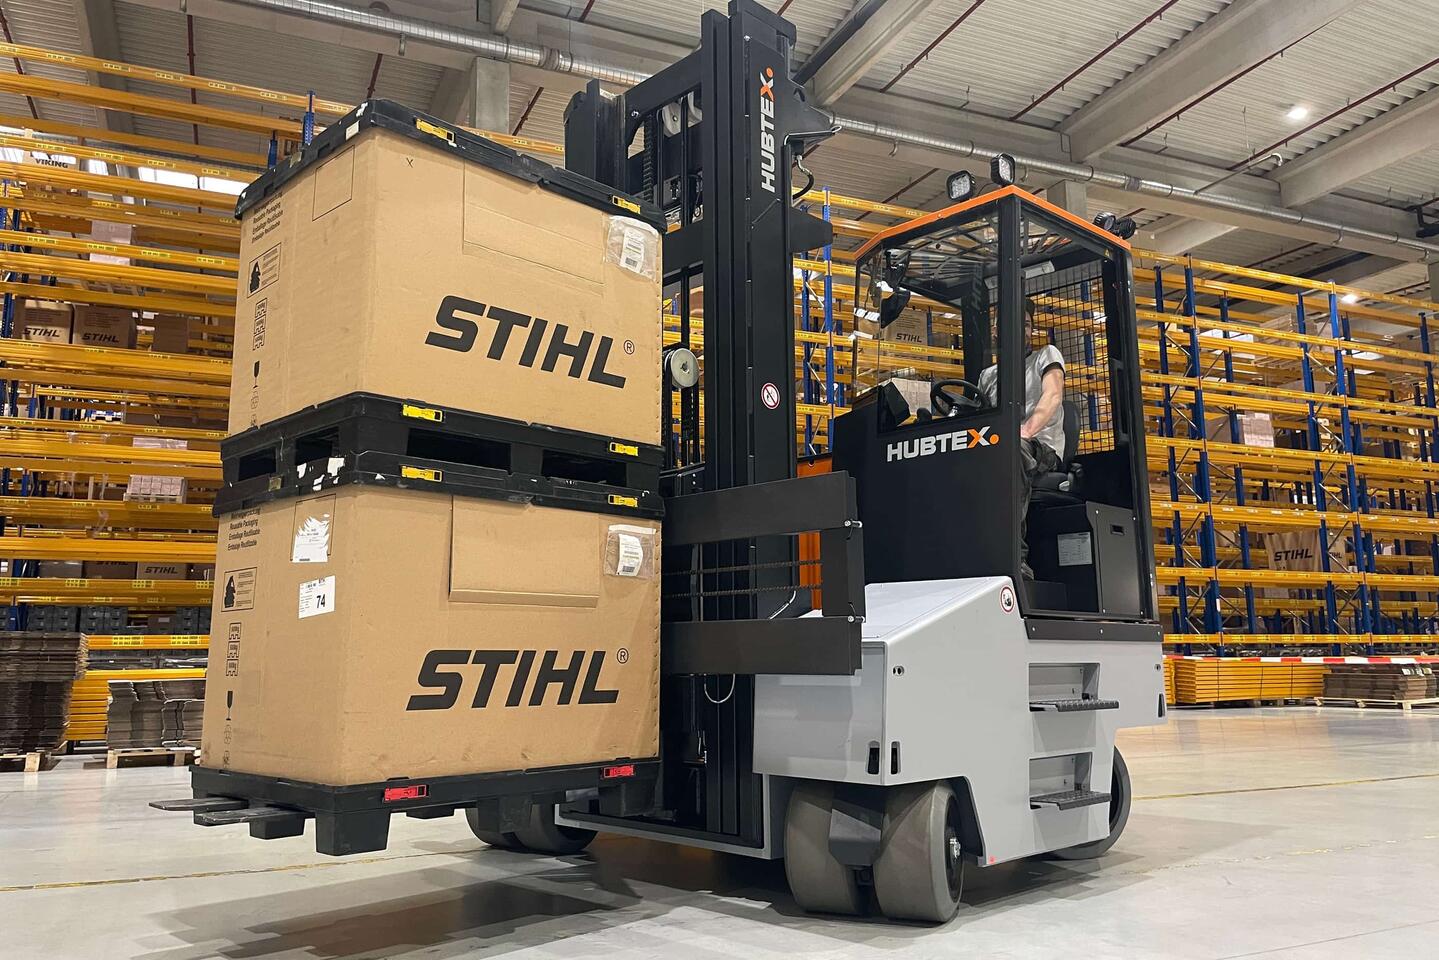 Forklift trucks in use at STIHL